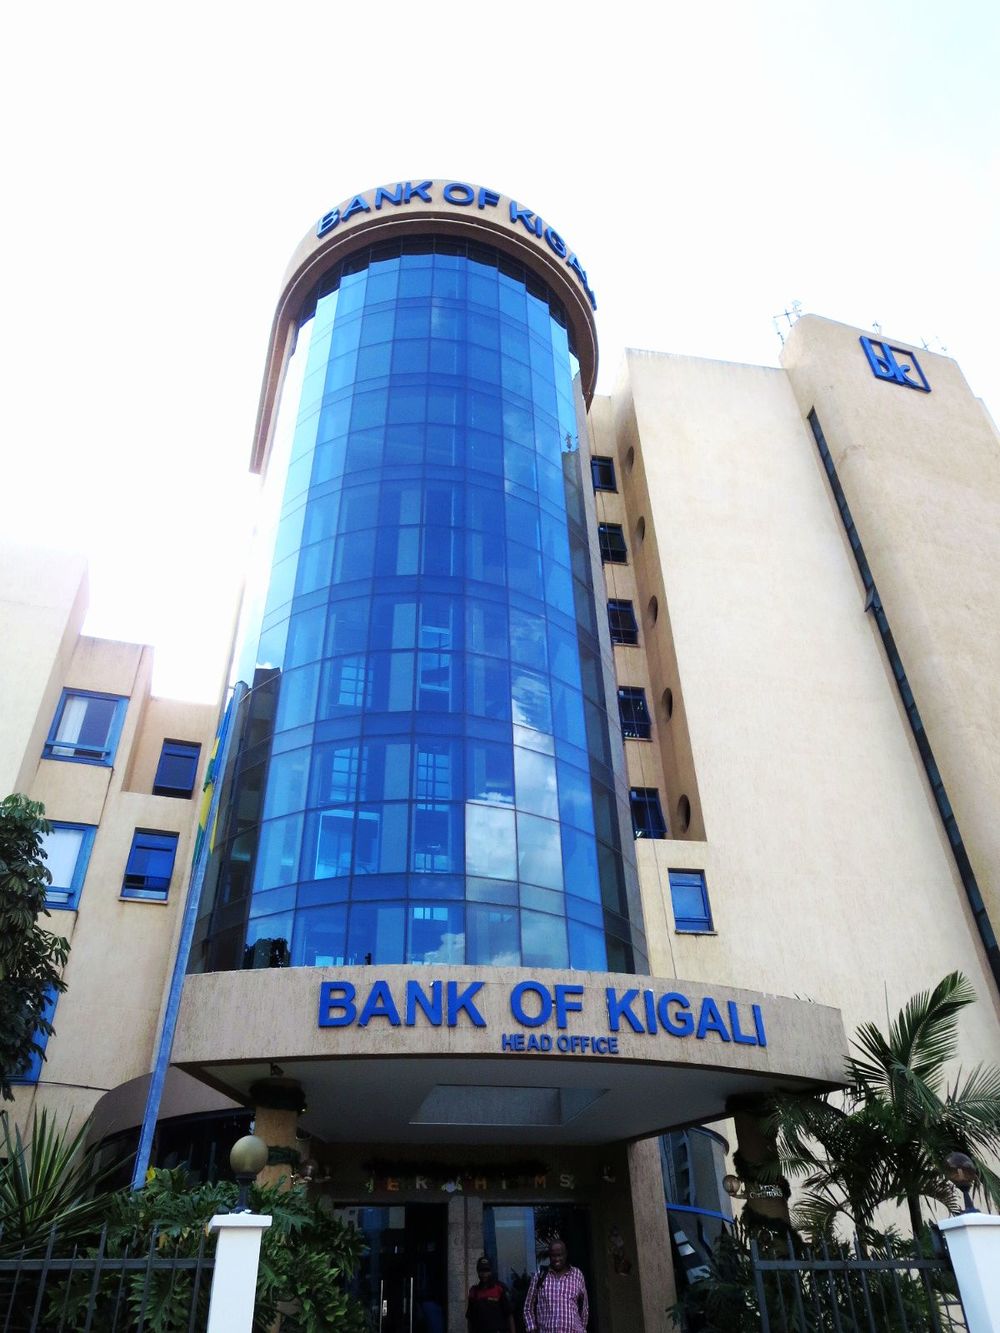 Bank of kigali 2013 annual report